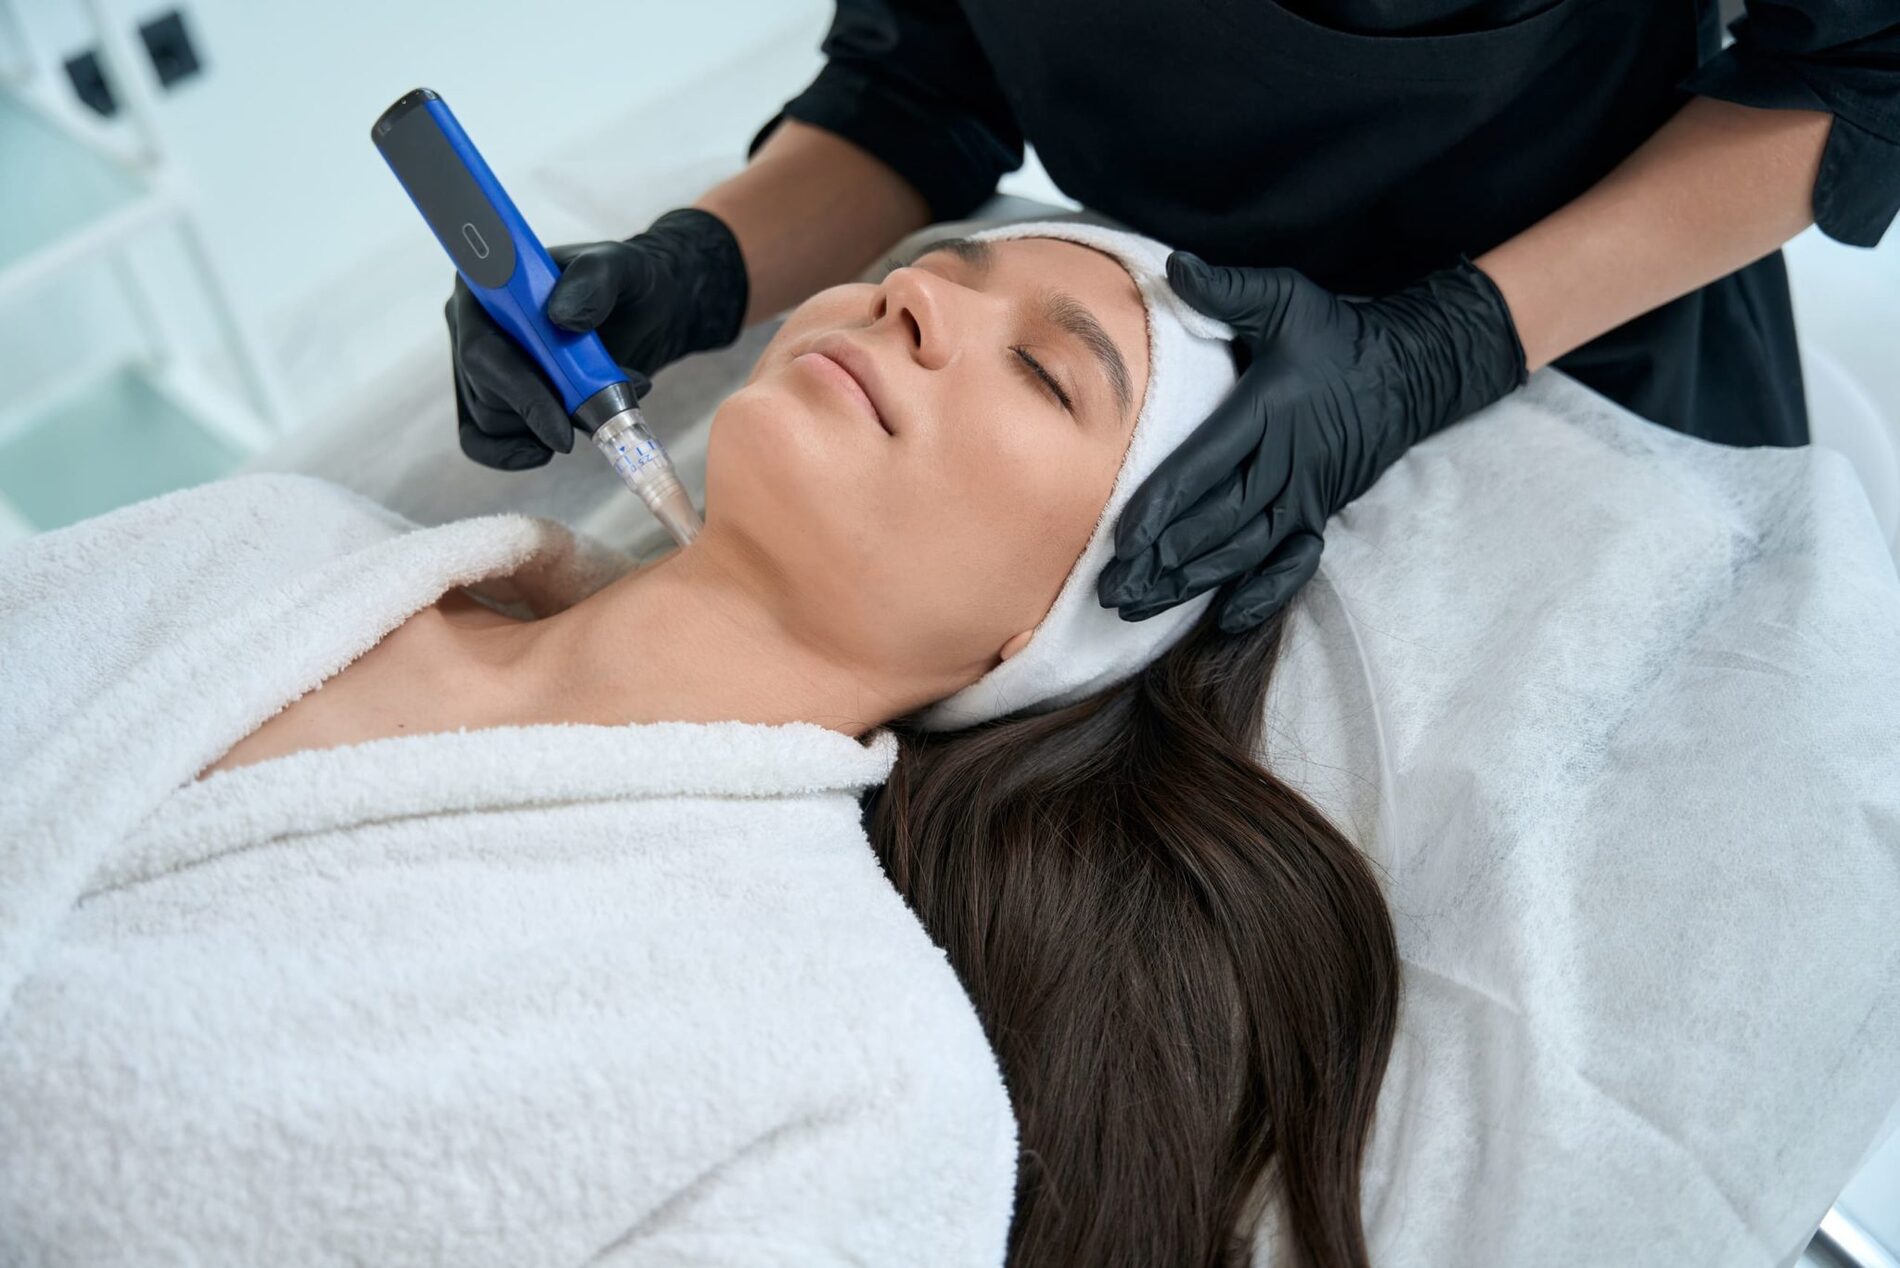 Girl getting Microneedling services | The Aesthetic dmc in Tucson, AZ